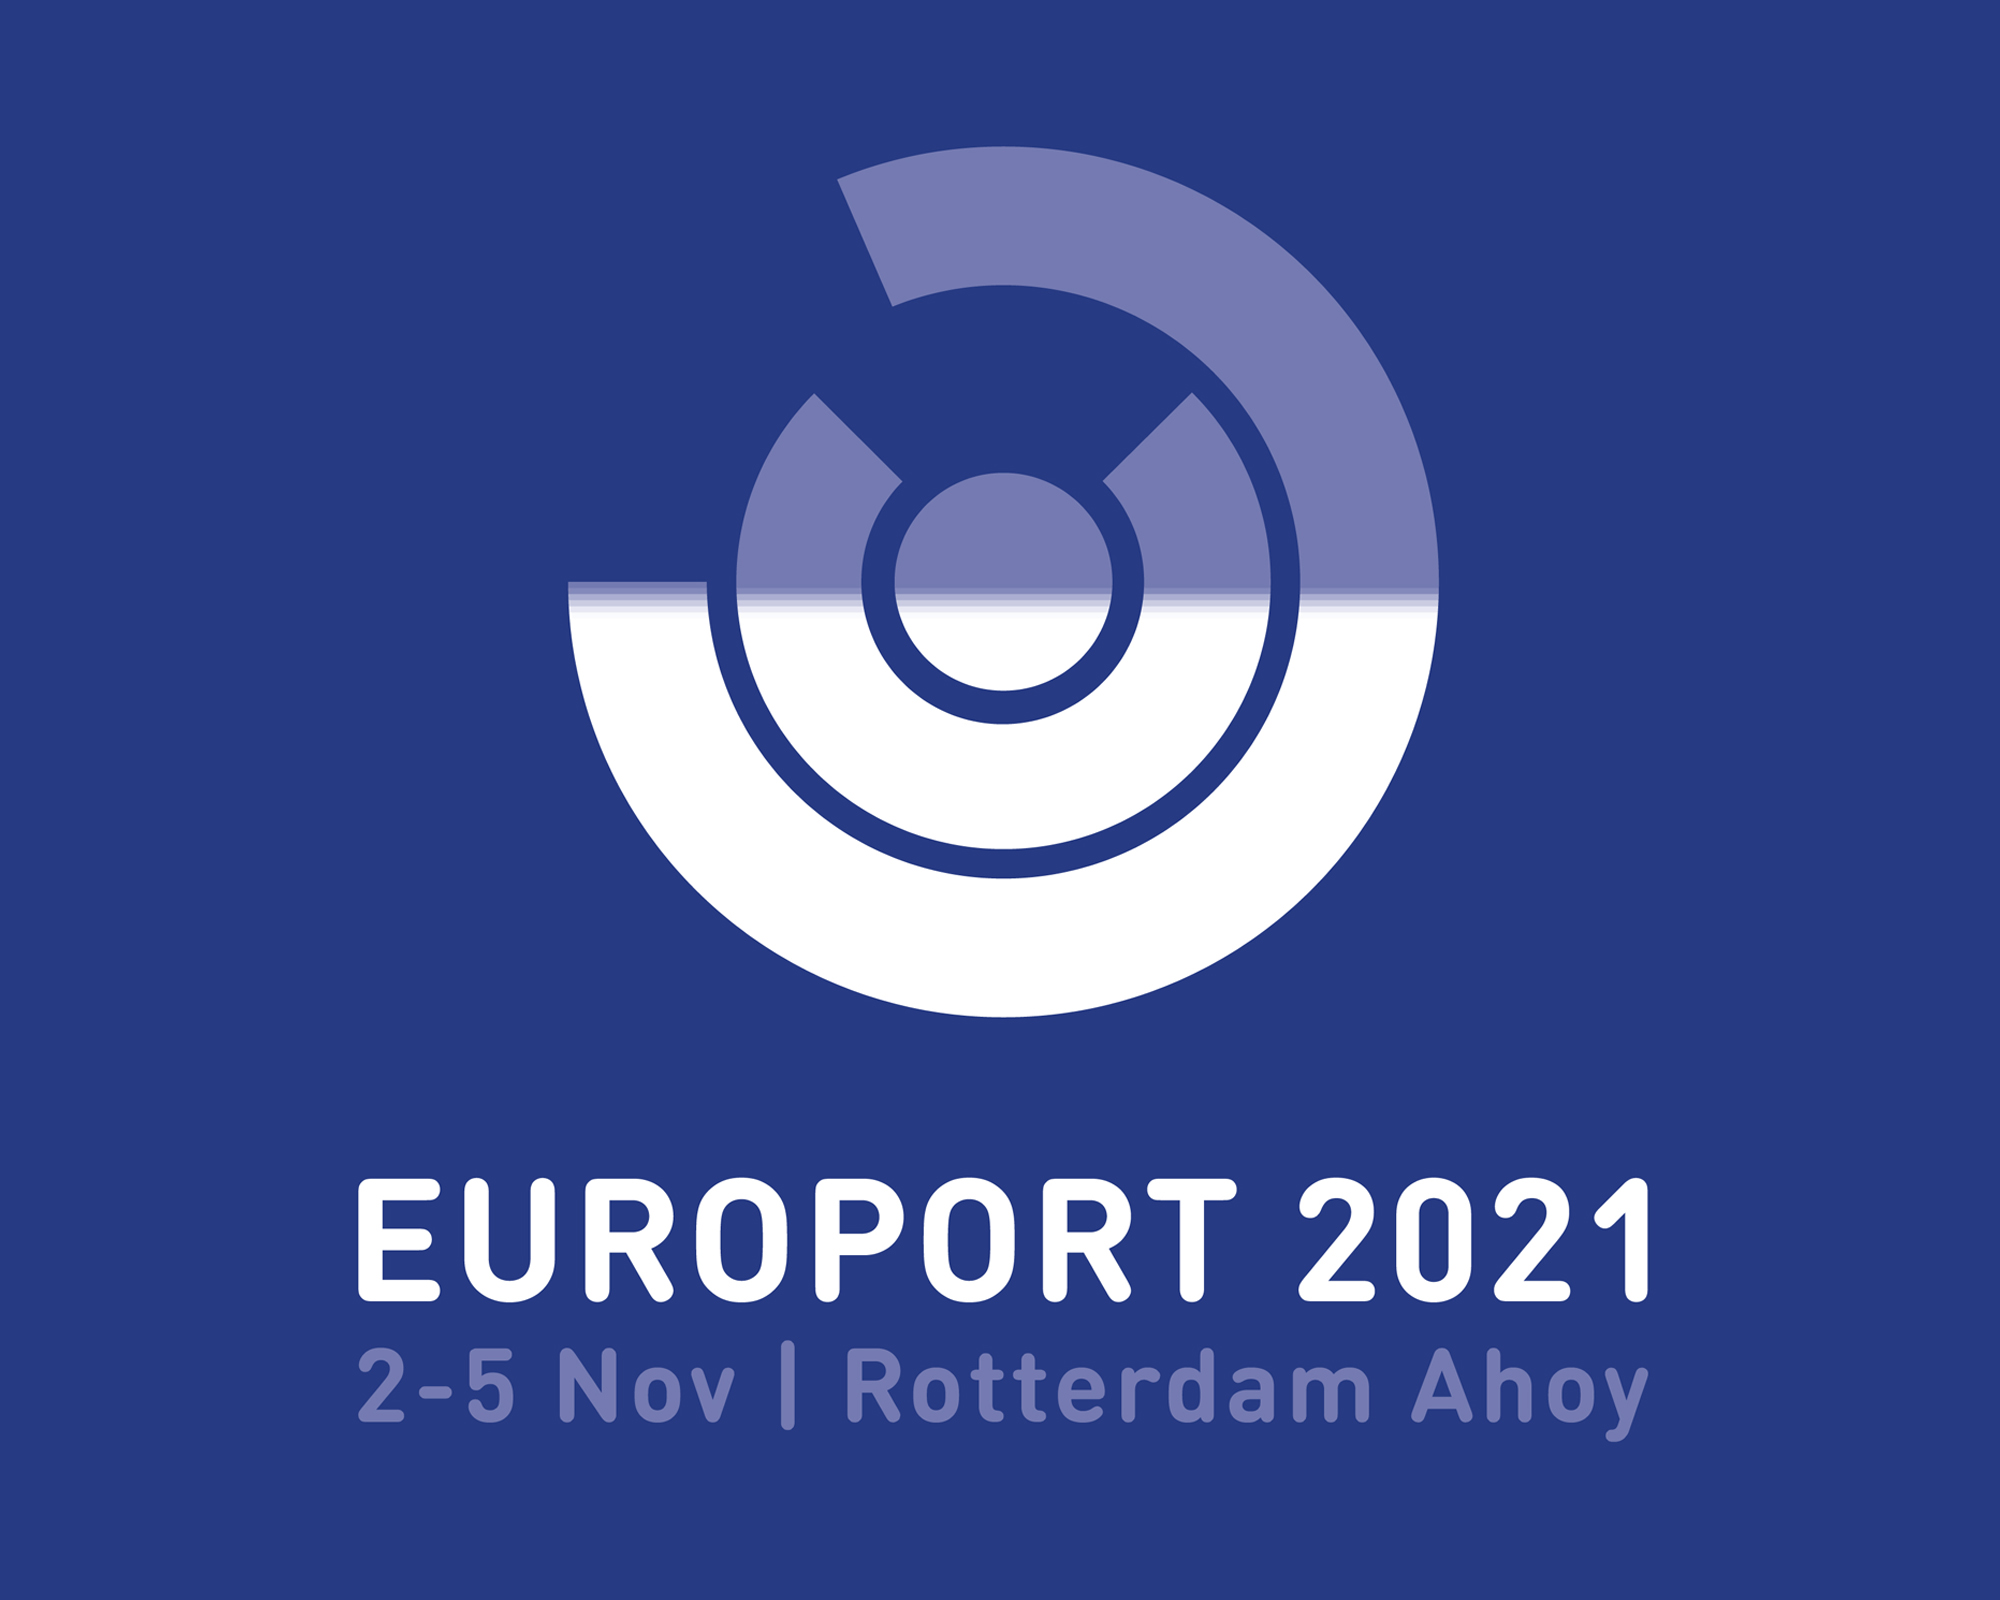 VISIT OUR BOOTH AT EUROPORT 2021 IN ROTTERDAM